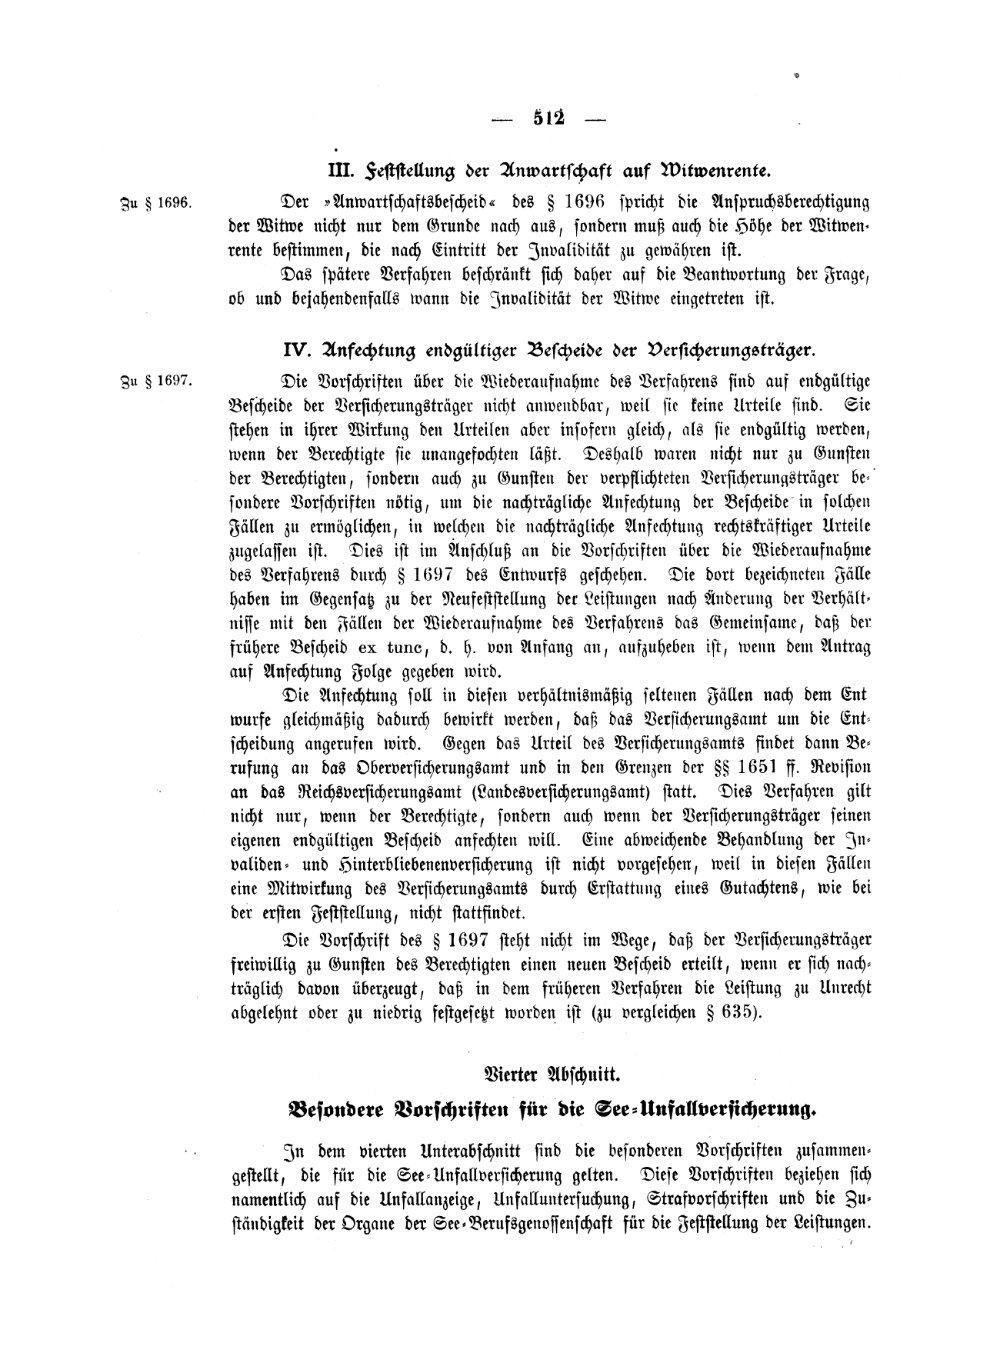 Scan of page 512